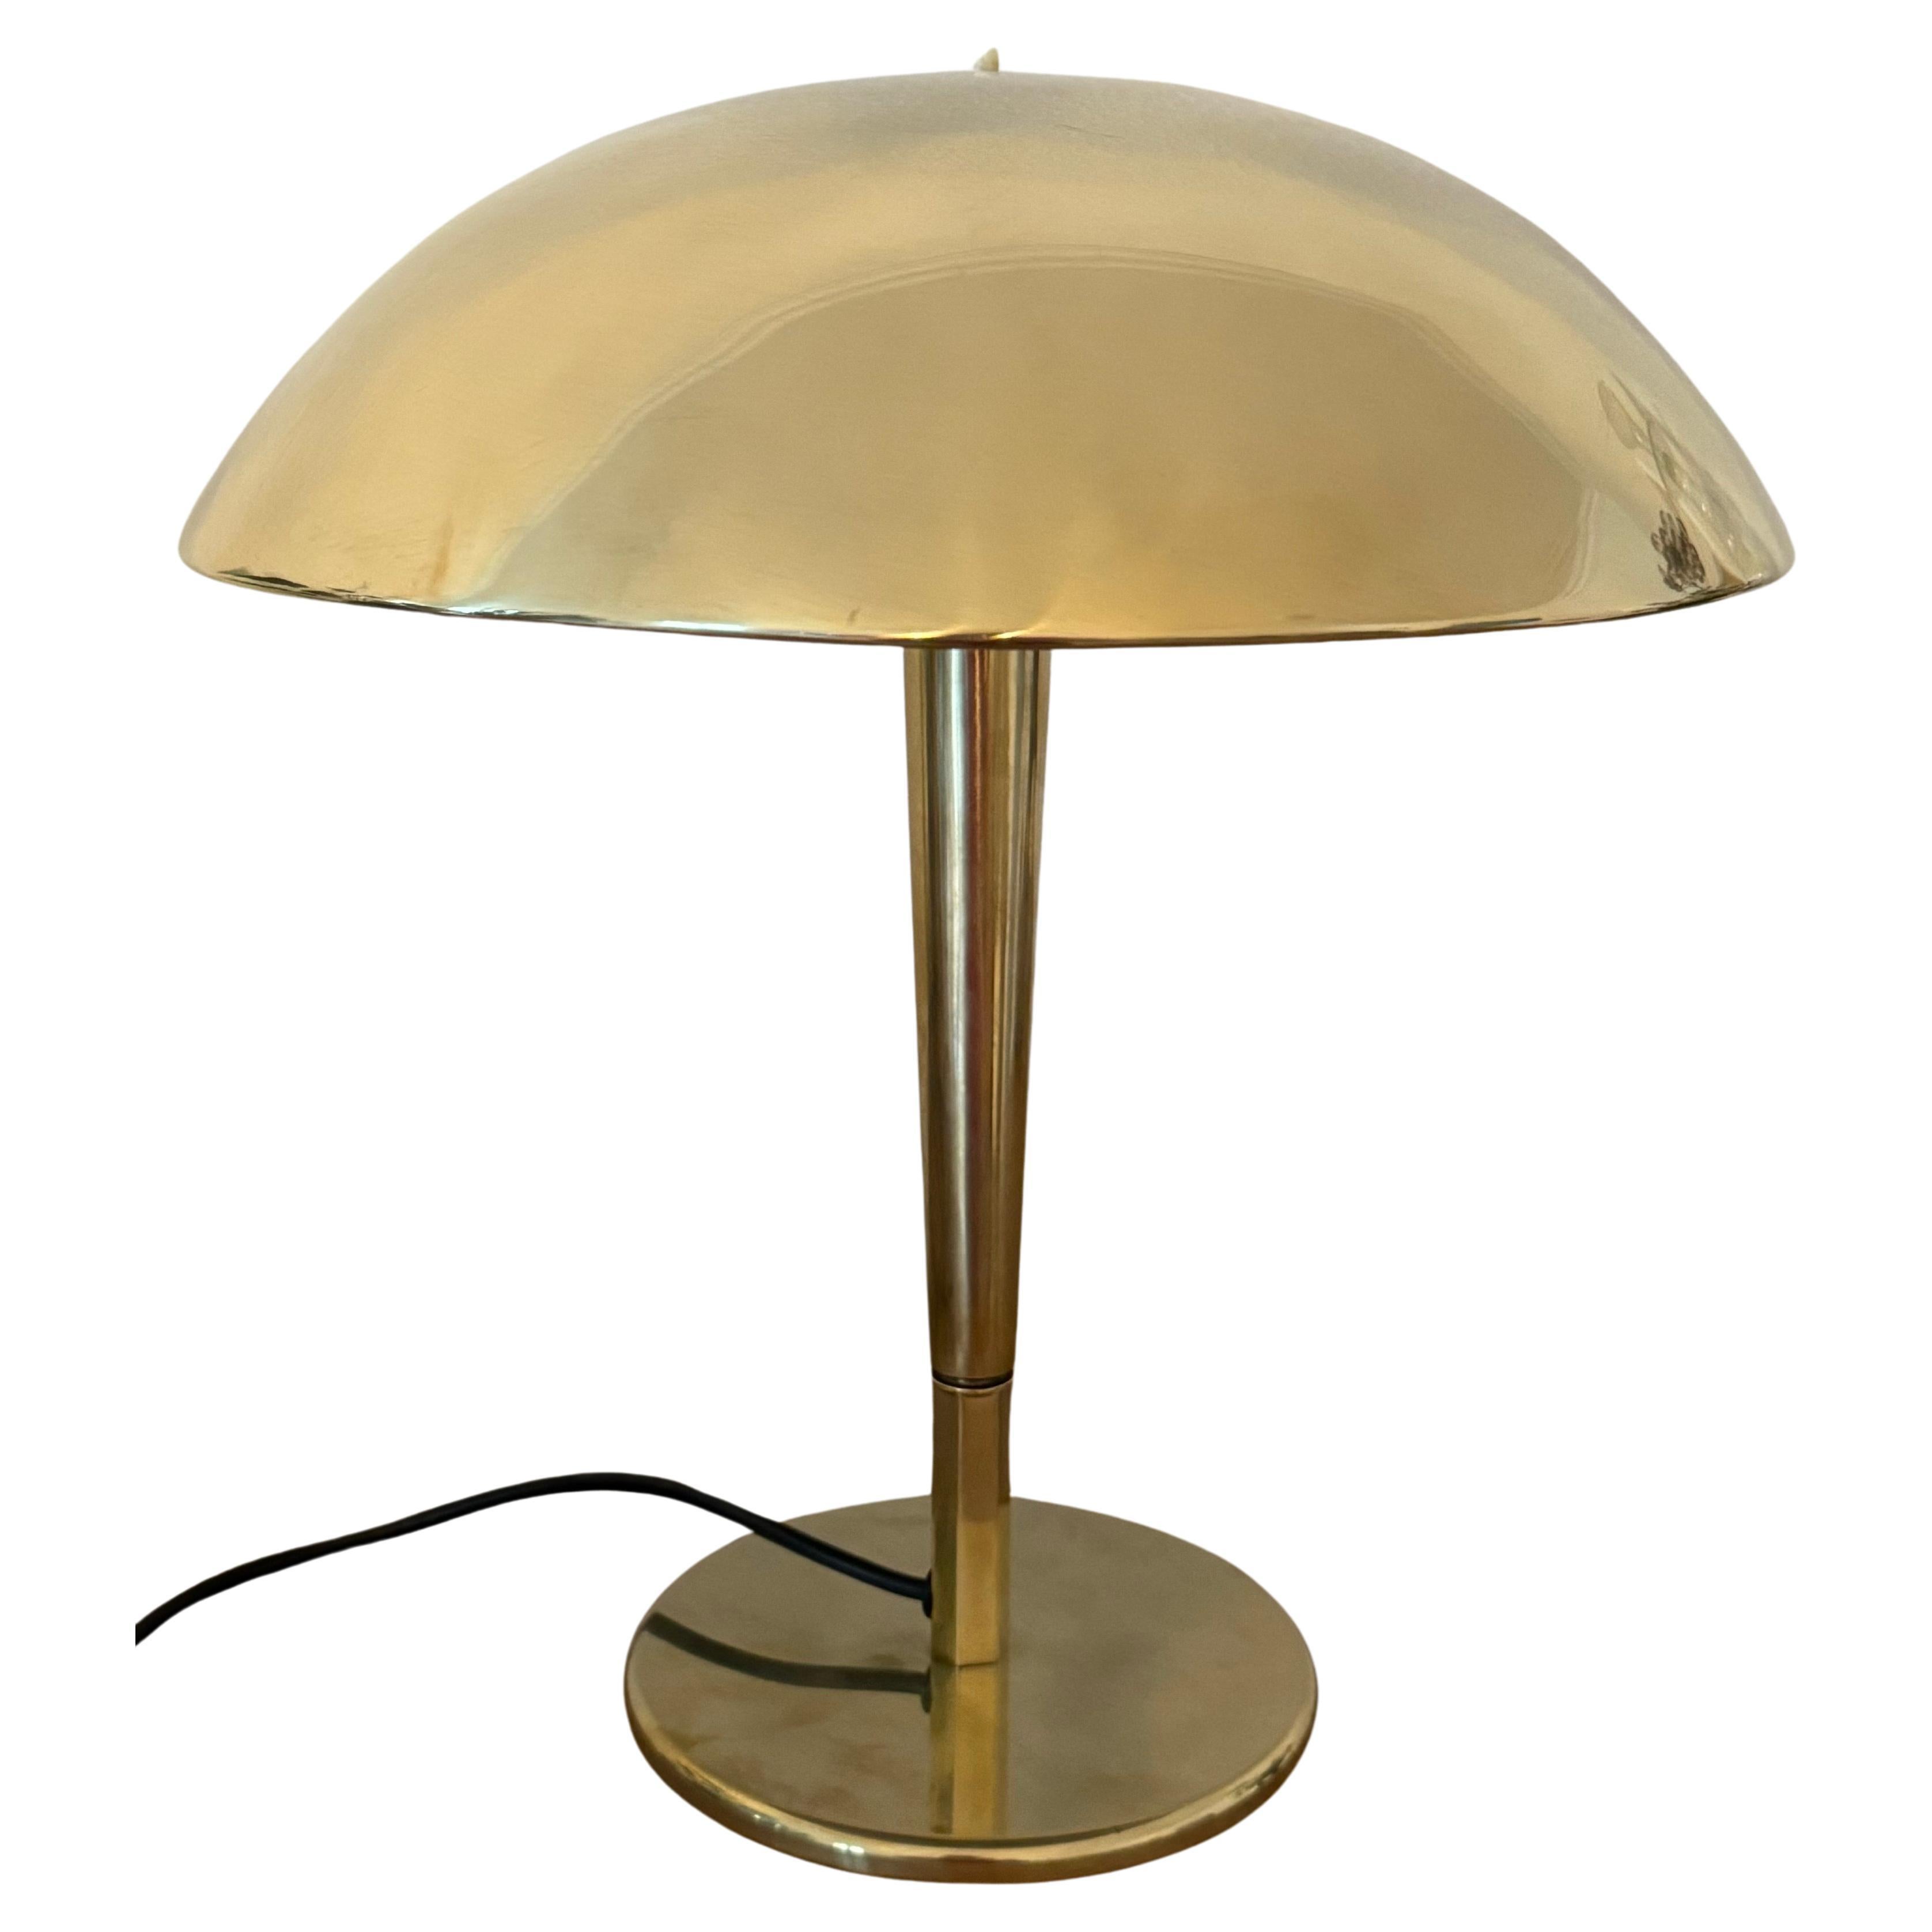 Rare large polished brass table lamp by Paavo Tynell produced by Taito, Finland 1940s. 
In an excellent vintage condition.

Measurements:
Height :    16.14  inches
Diameter:  14.37 inches

Socket: 2 x original Bakelite E27 / E26 for US standards for